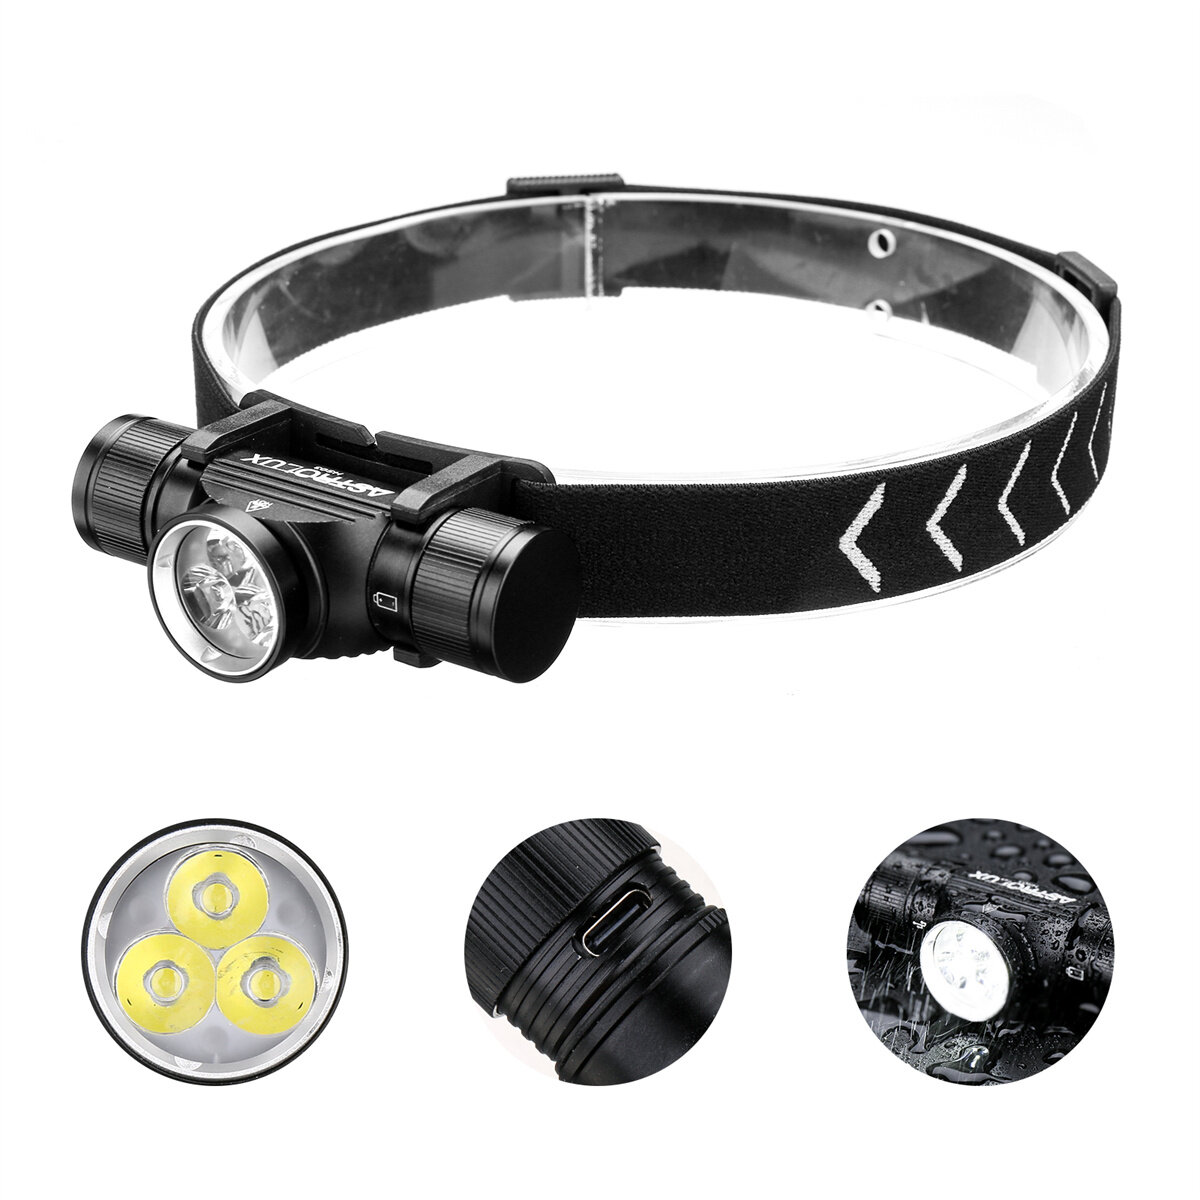 

Astrolux® HS03 3* LH351B Powerful LED Headlamp 1080LM Headlight Type-C Rechargeable with 18650 Battery Waterproof Campin